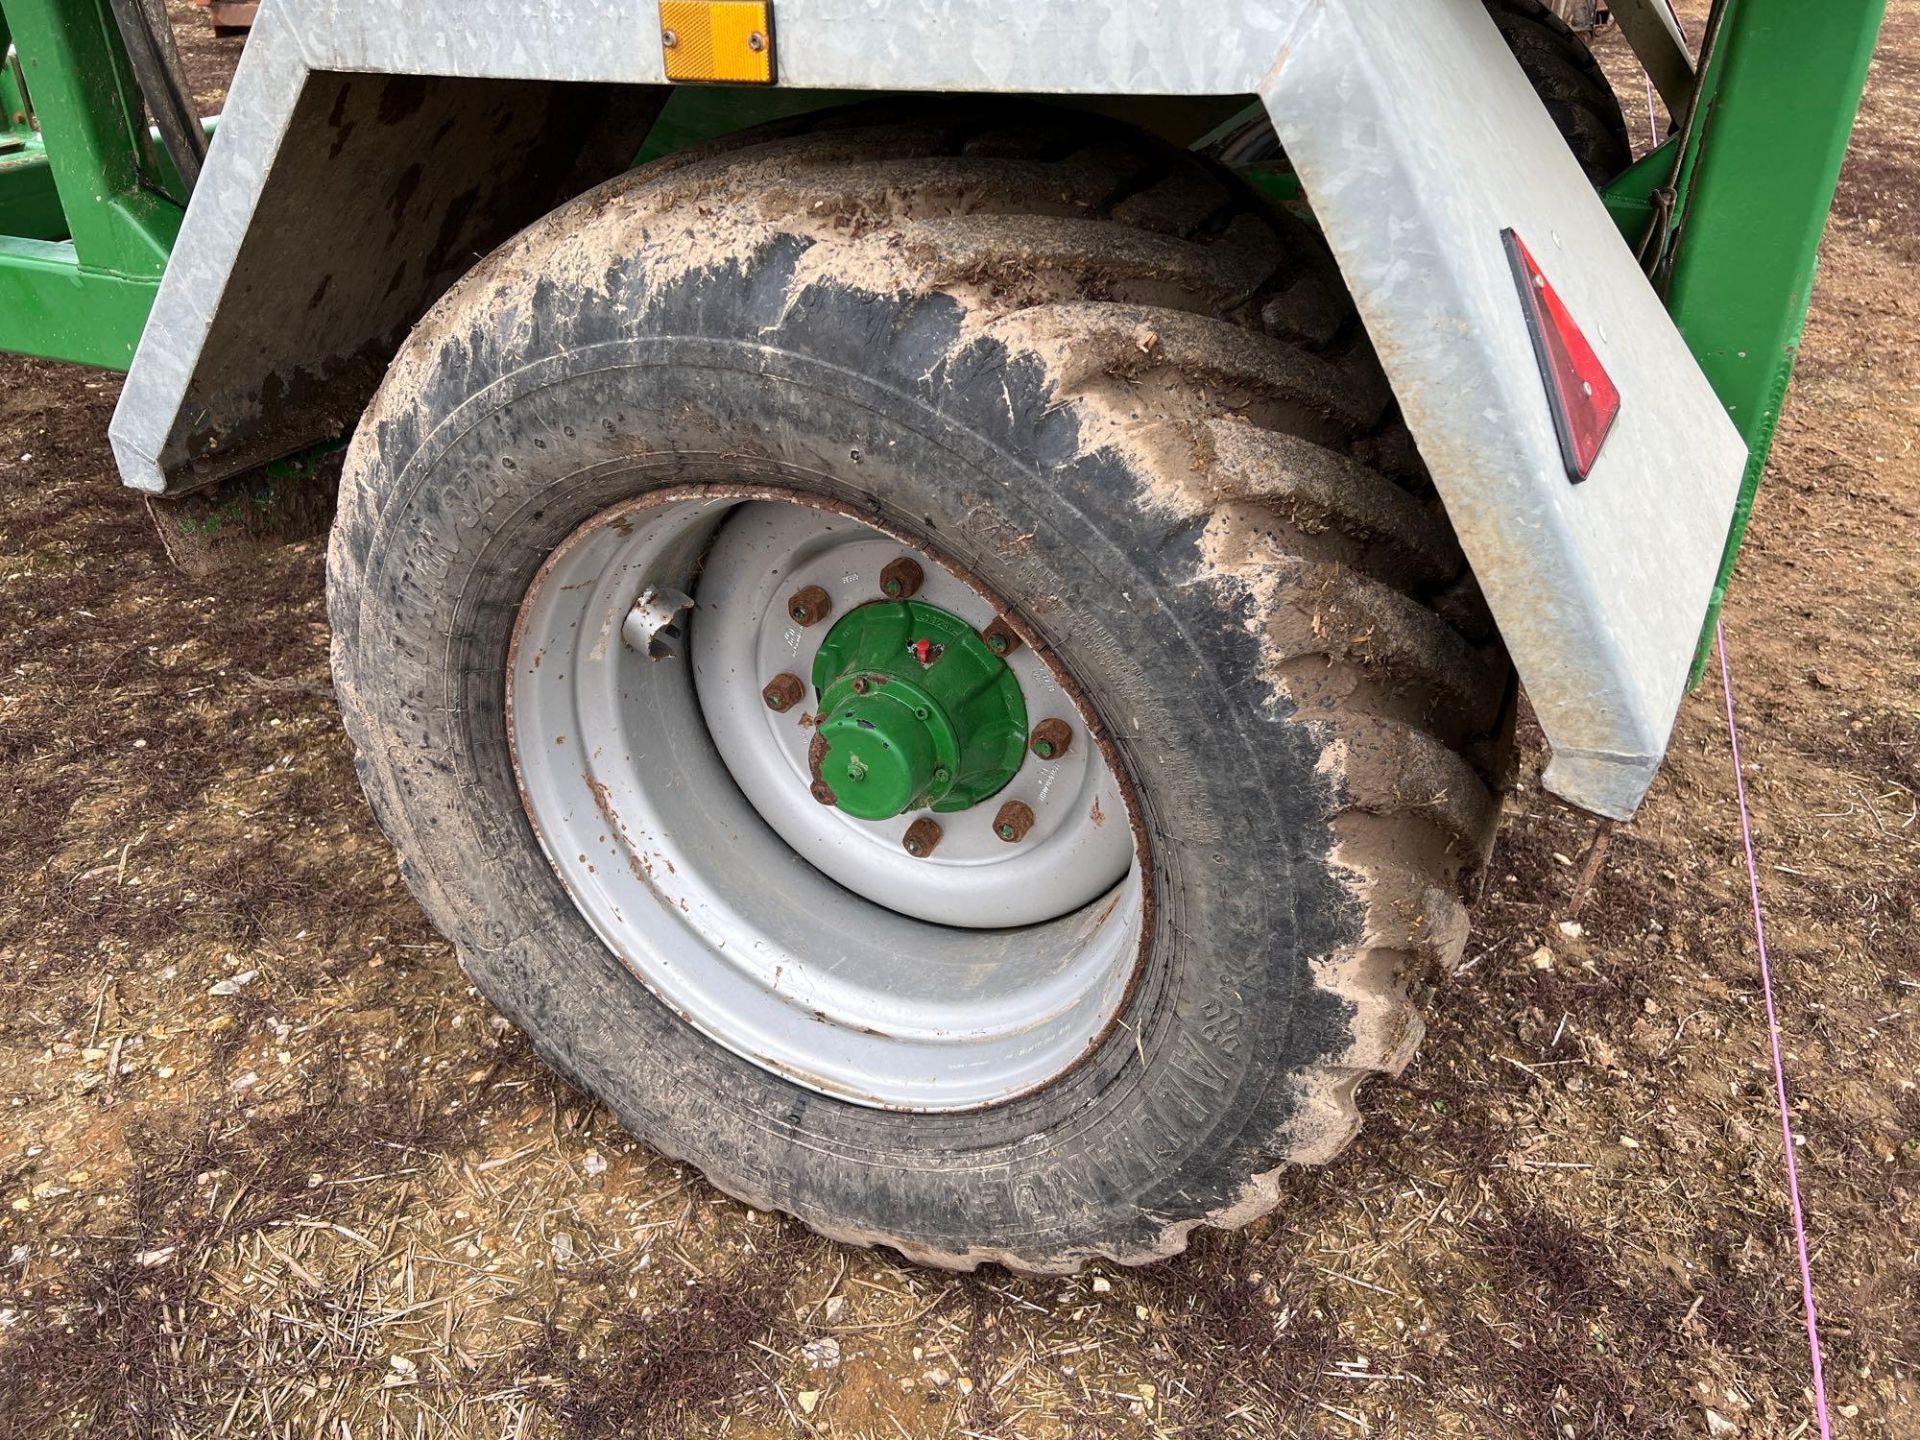 6T feed dispensing trailer (2019) - Image 6 of 8